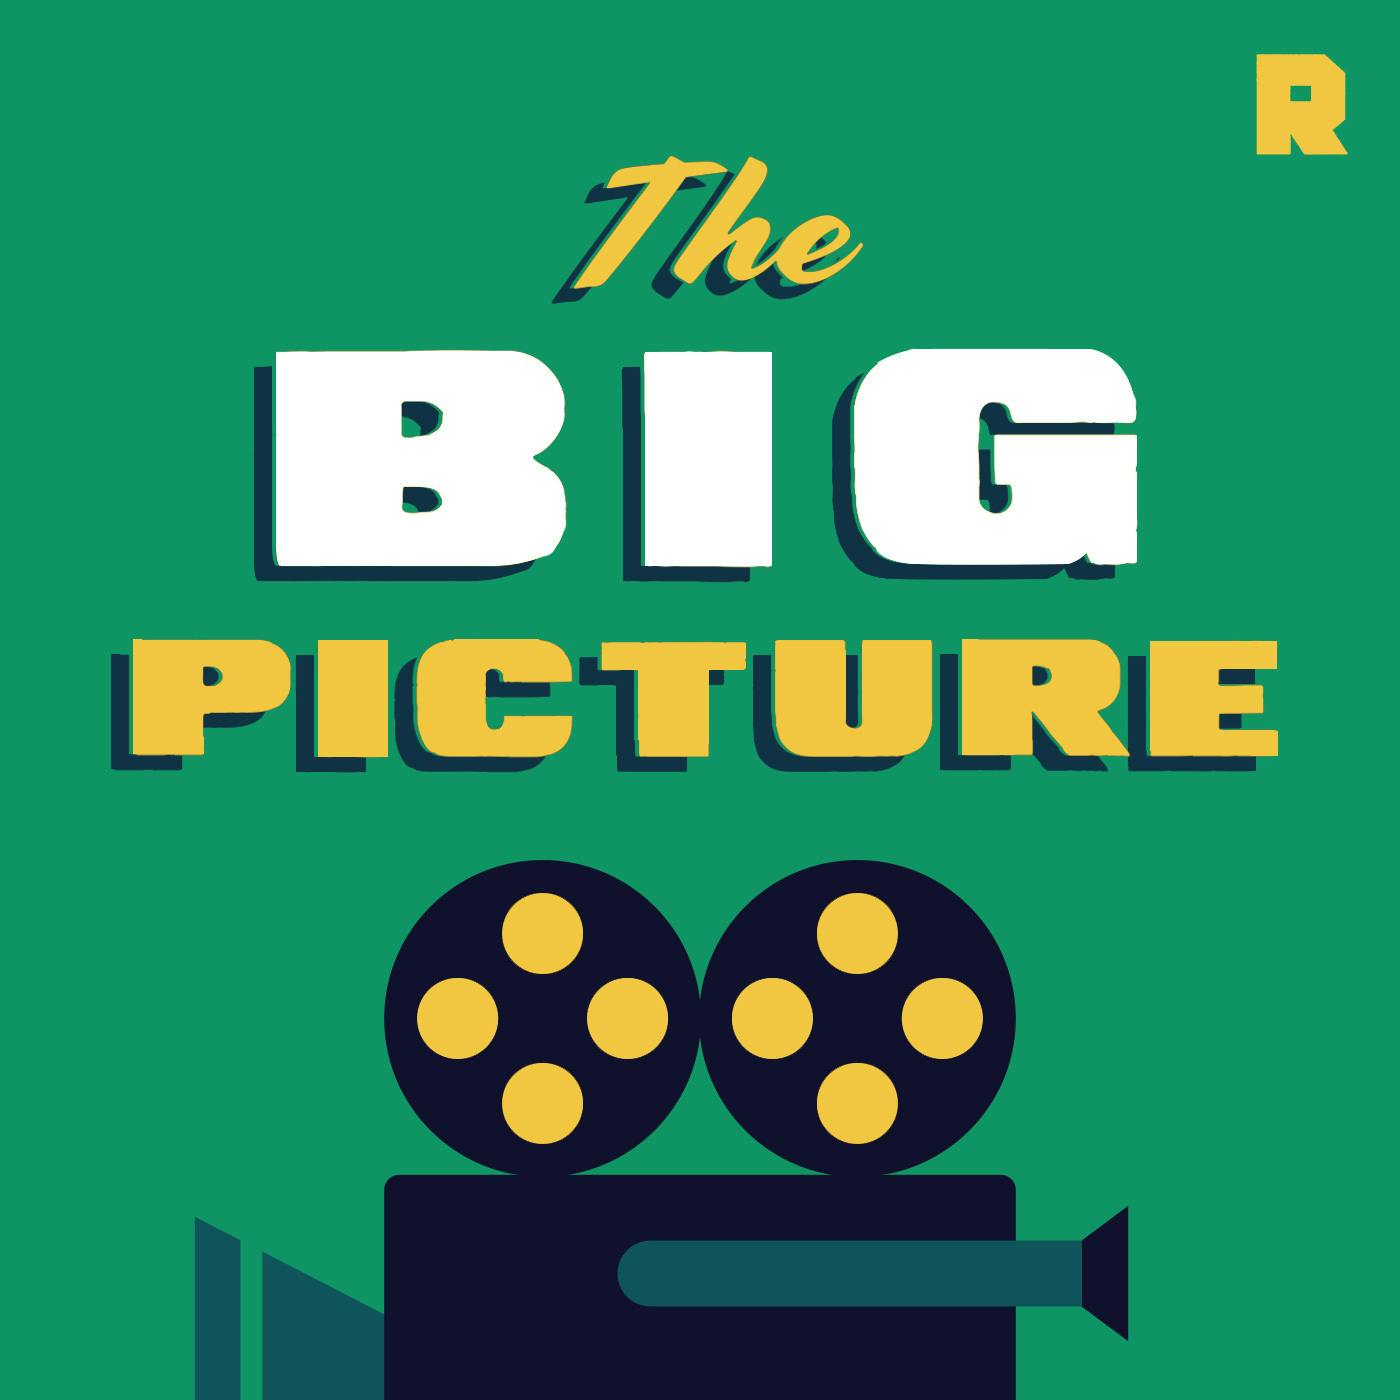 Beastie Boys Made a Movie. We Made a Beastie Boys Podcast. | The Big Picture